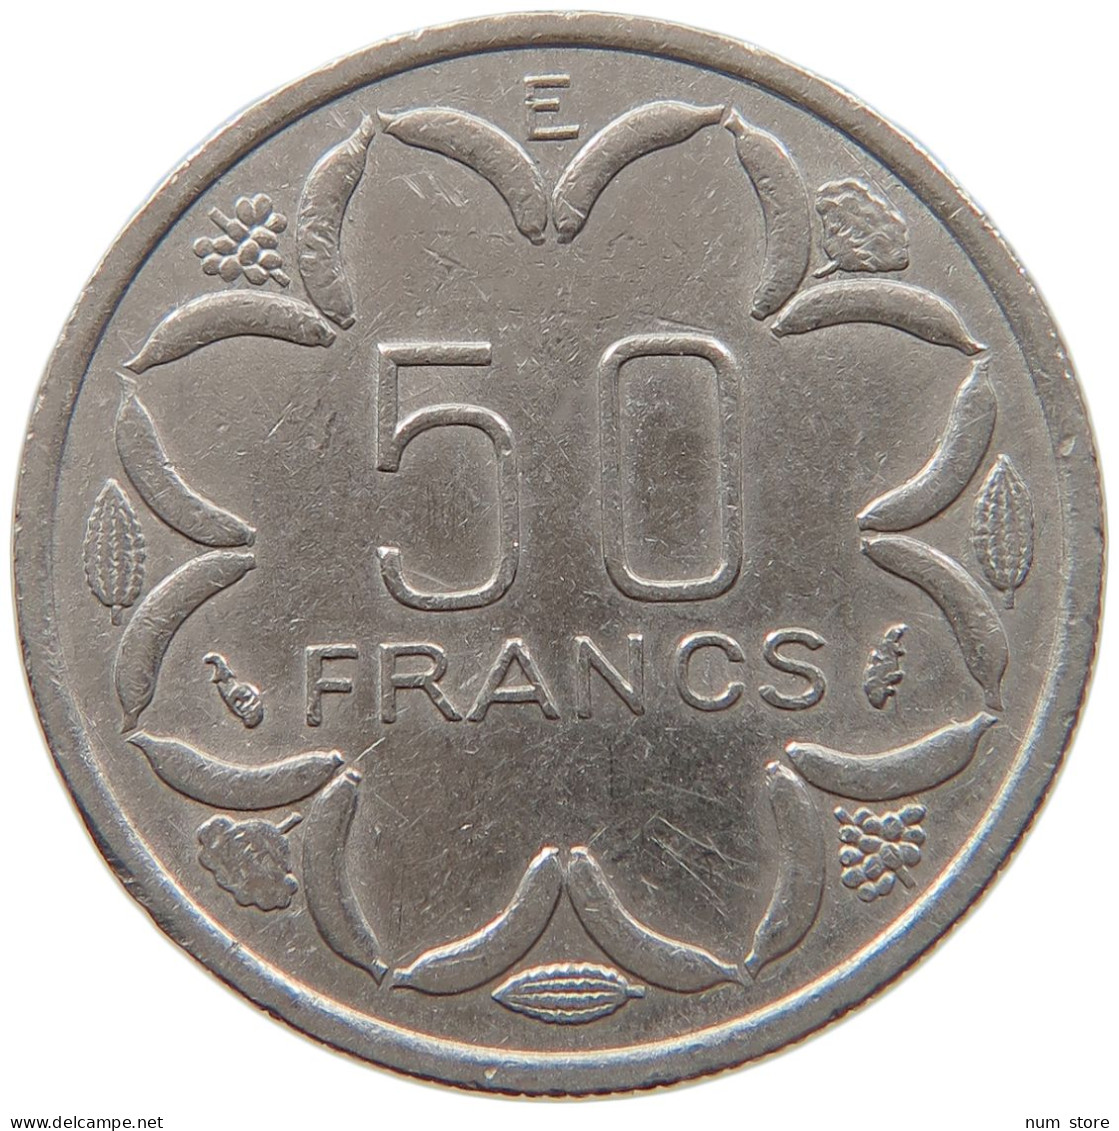 CENTRAL AFRICAN STATES 50 FRANCS 1976  #MA 065258 - Central African Republic